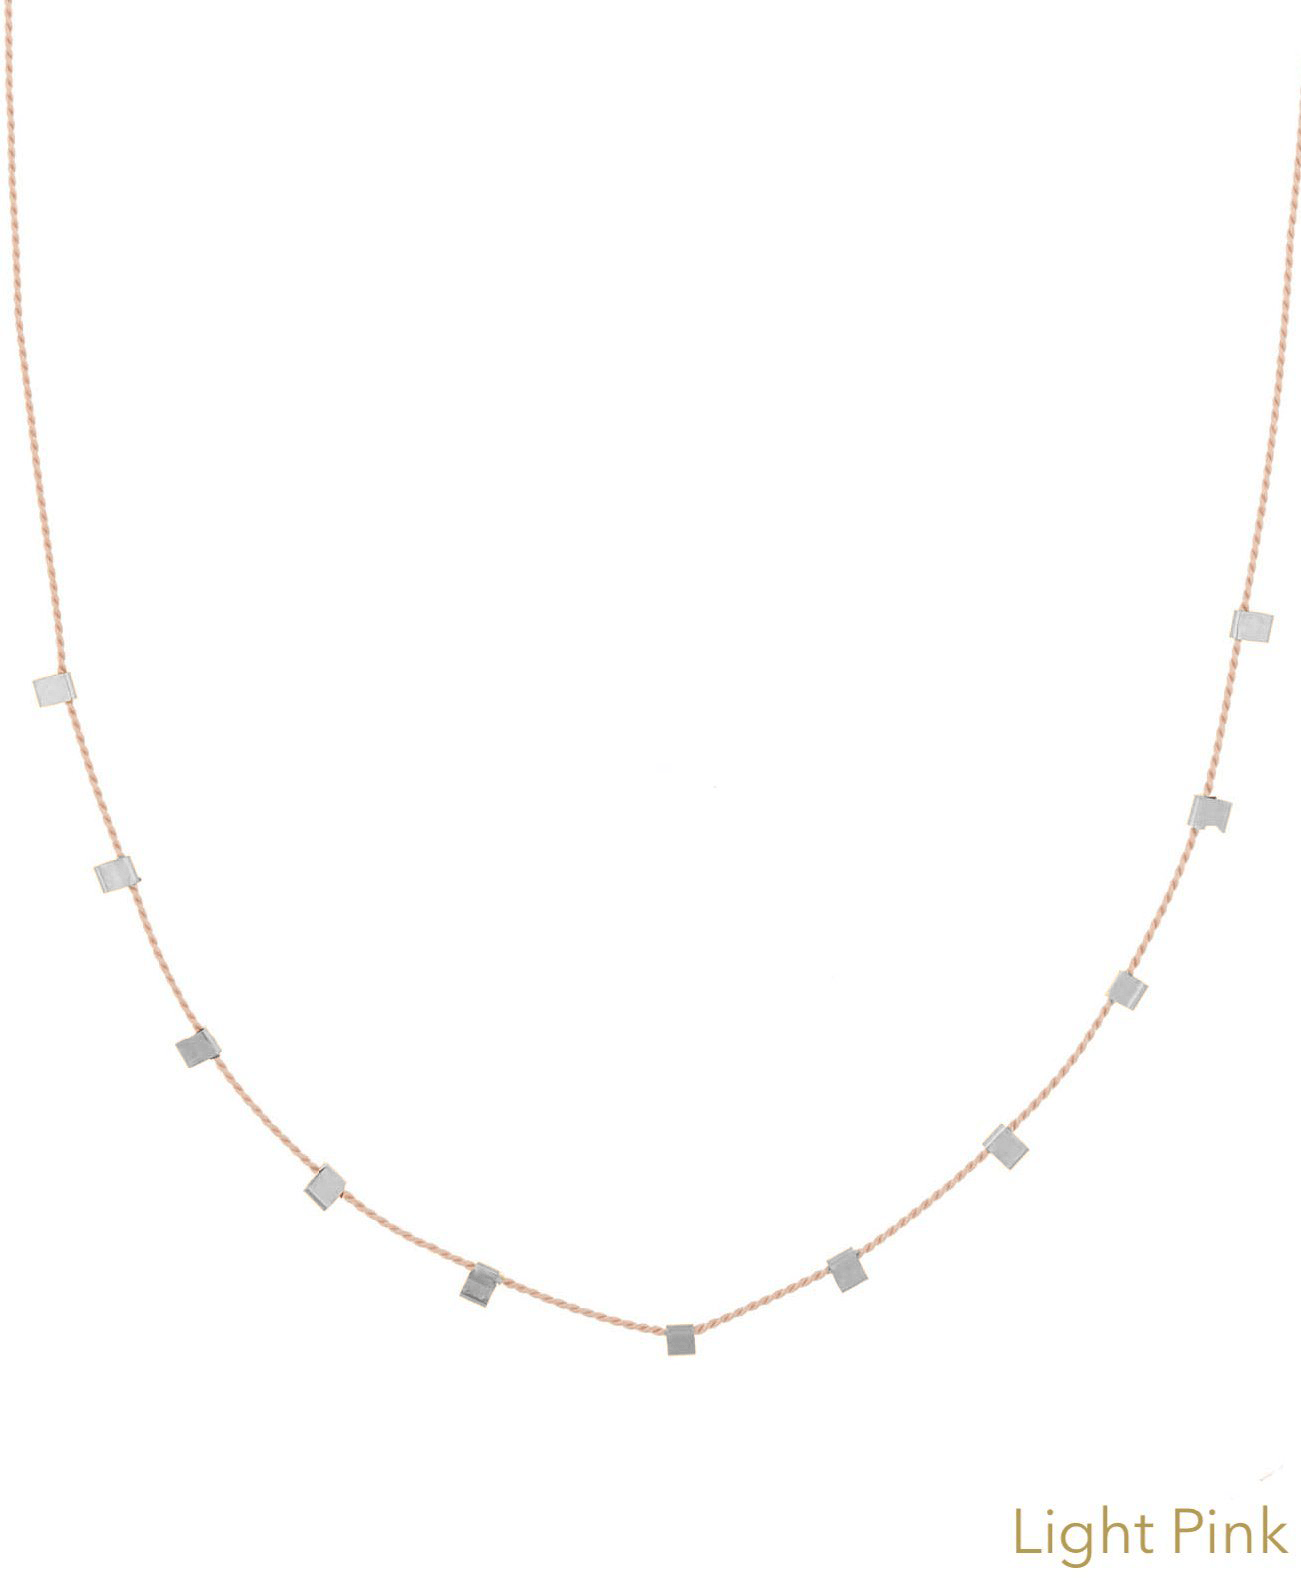 Hilo Necklace by KOZAKH. A 16 inch long natural silk thread necklace, embellished with Sterling Silver square cut metals.